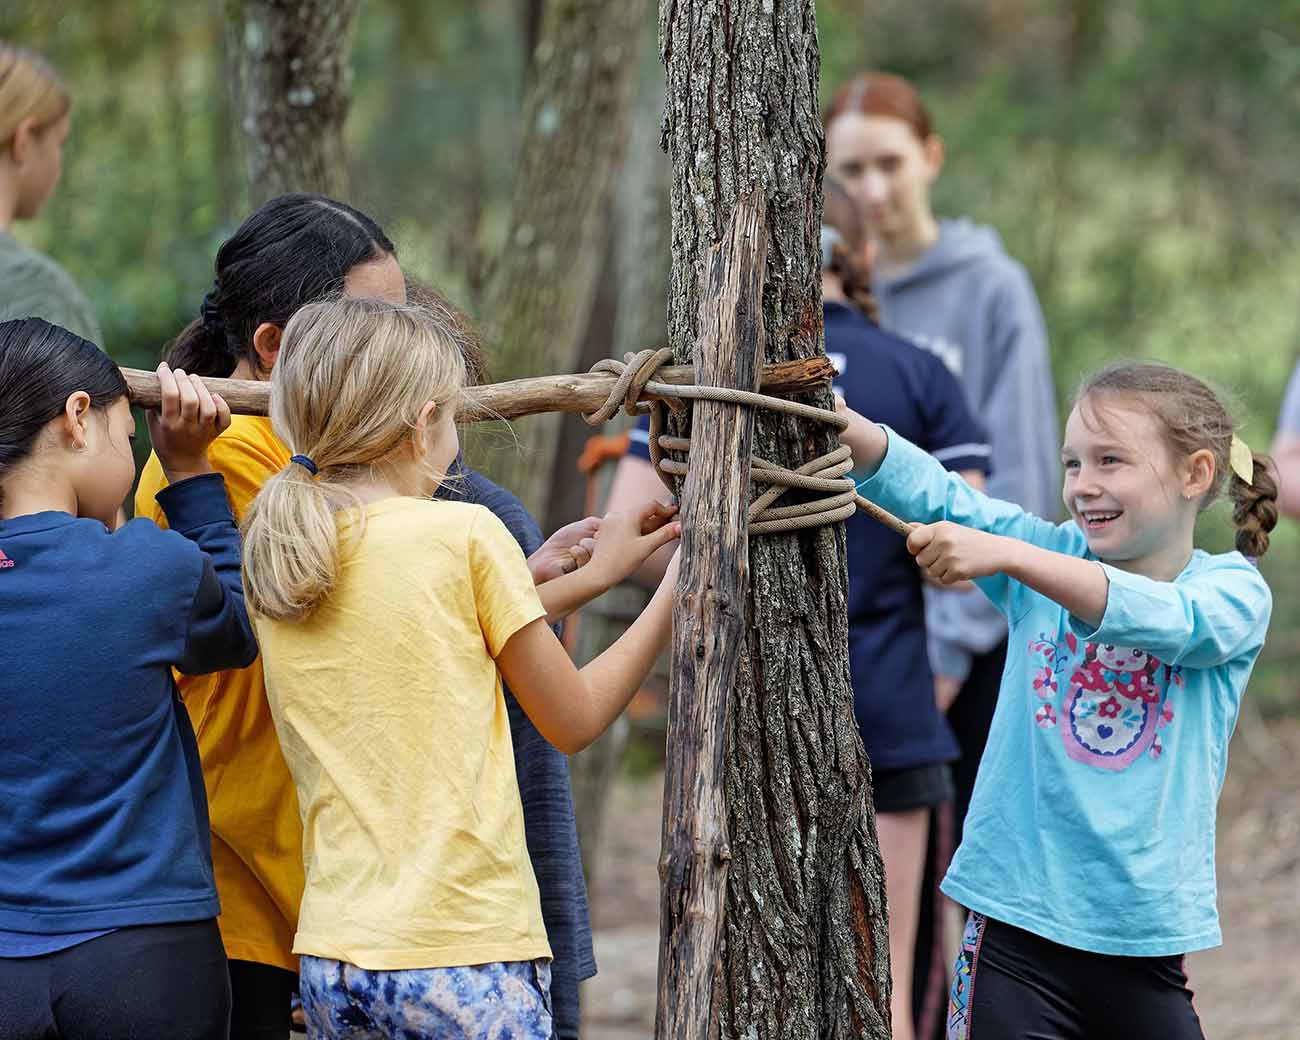 Group of children engaging in a team-building activity, tying ropes around a tree in a forest setting.